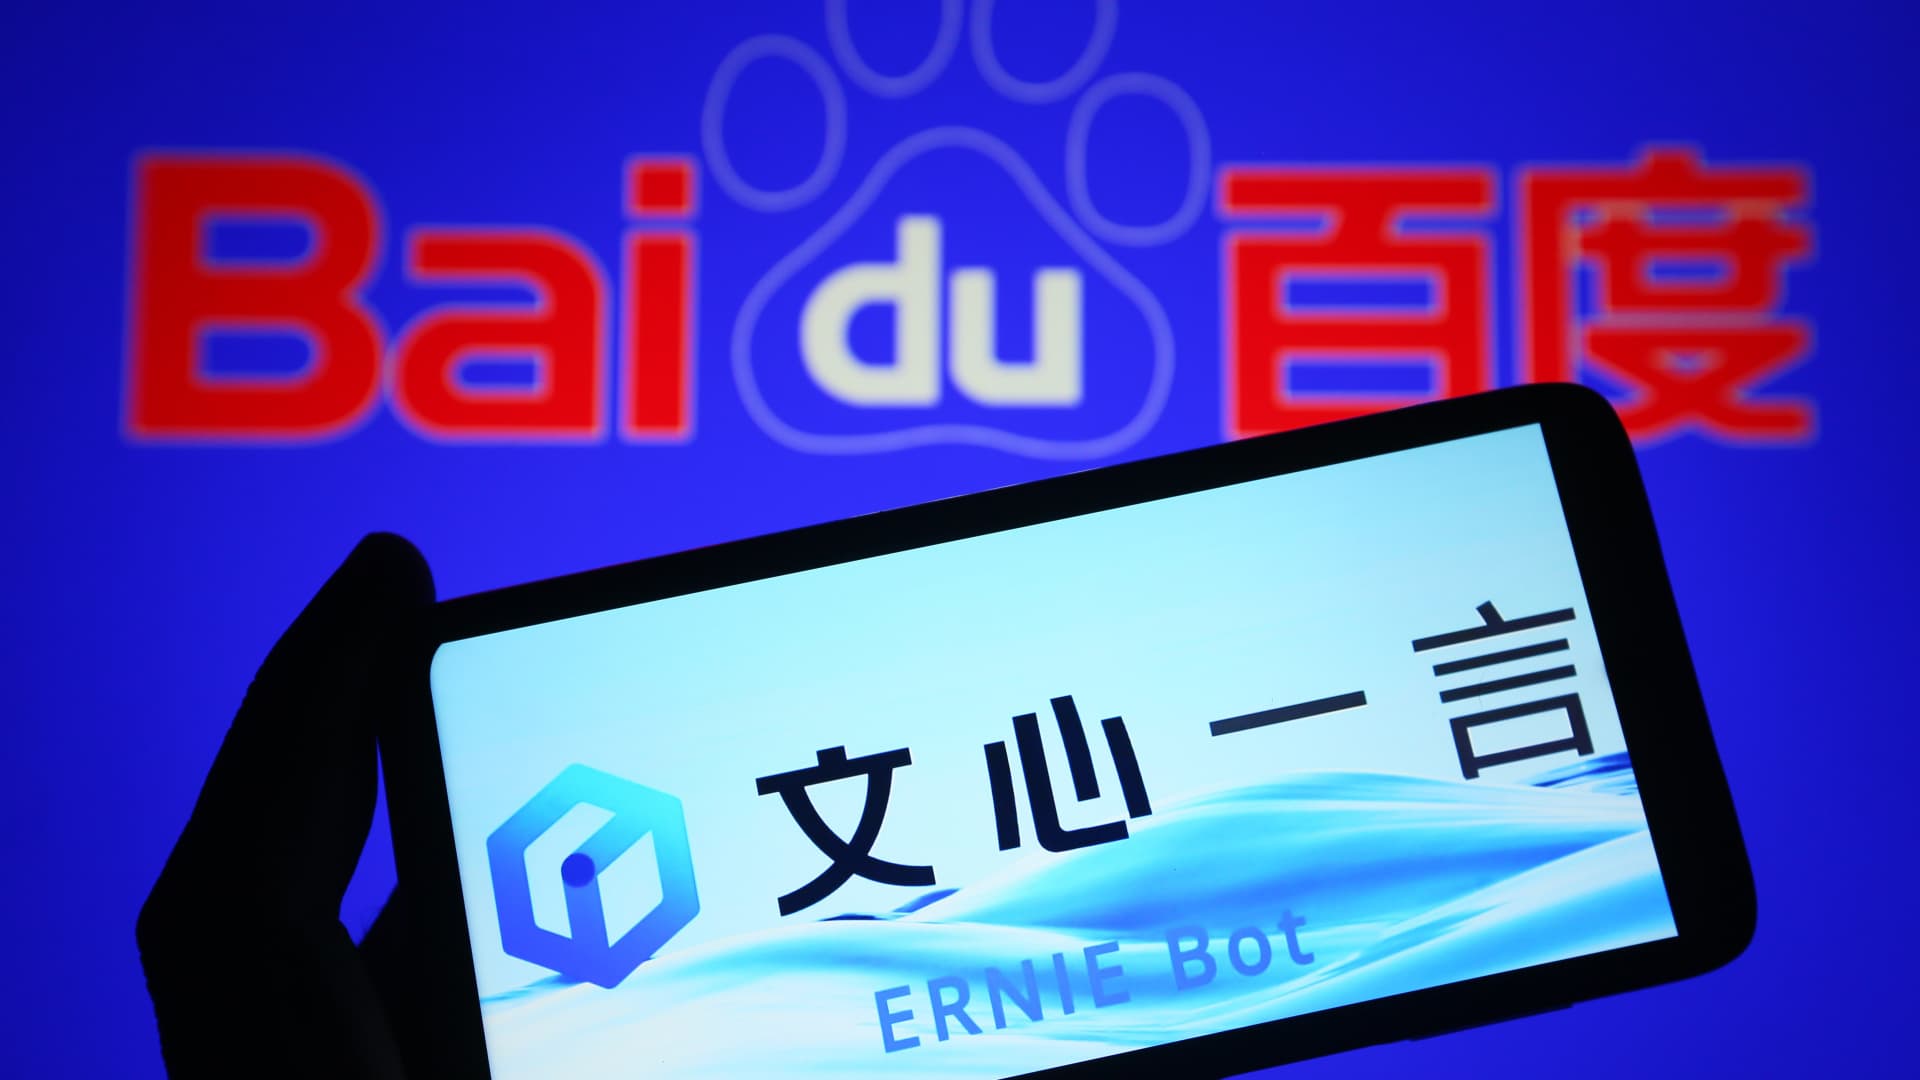 Baidu launches a slew of AI applications after its Ernie chatbot gets public approval